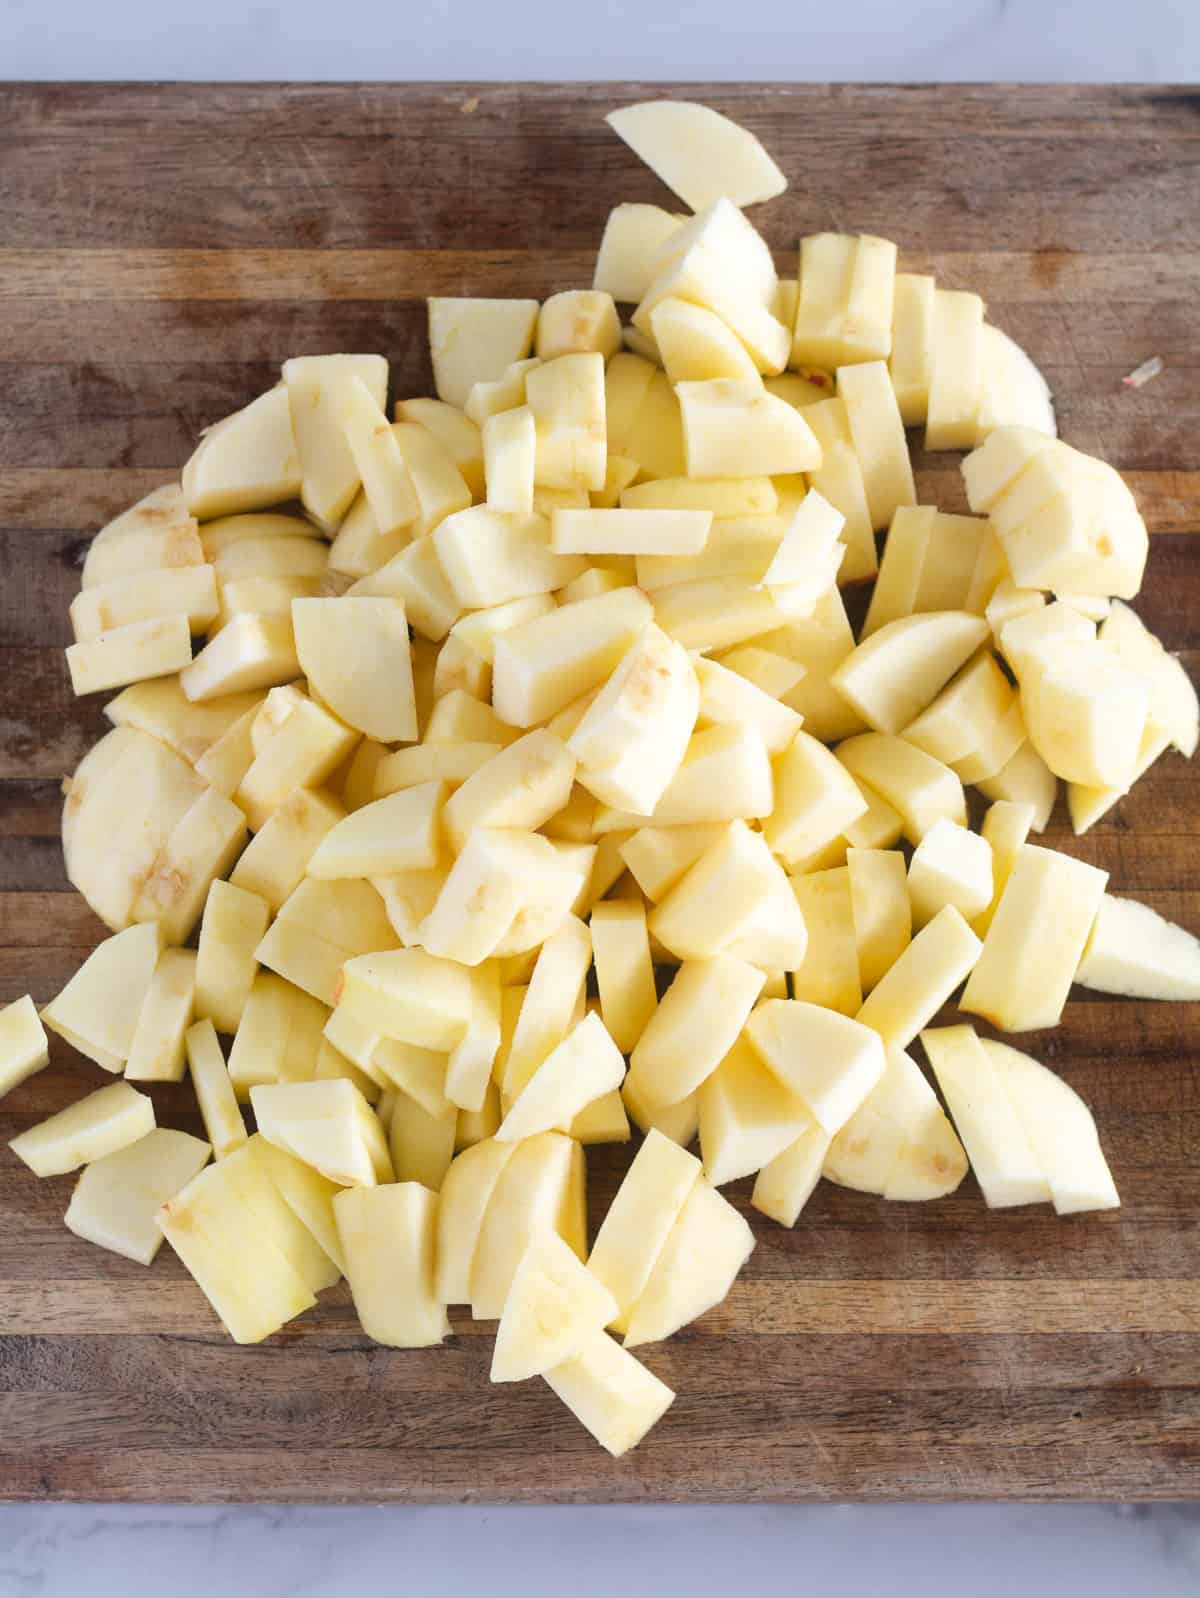 peeled and chopped apples on a wooden cutting board.